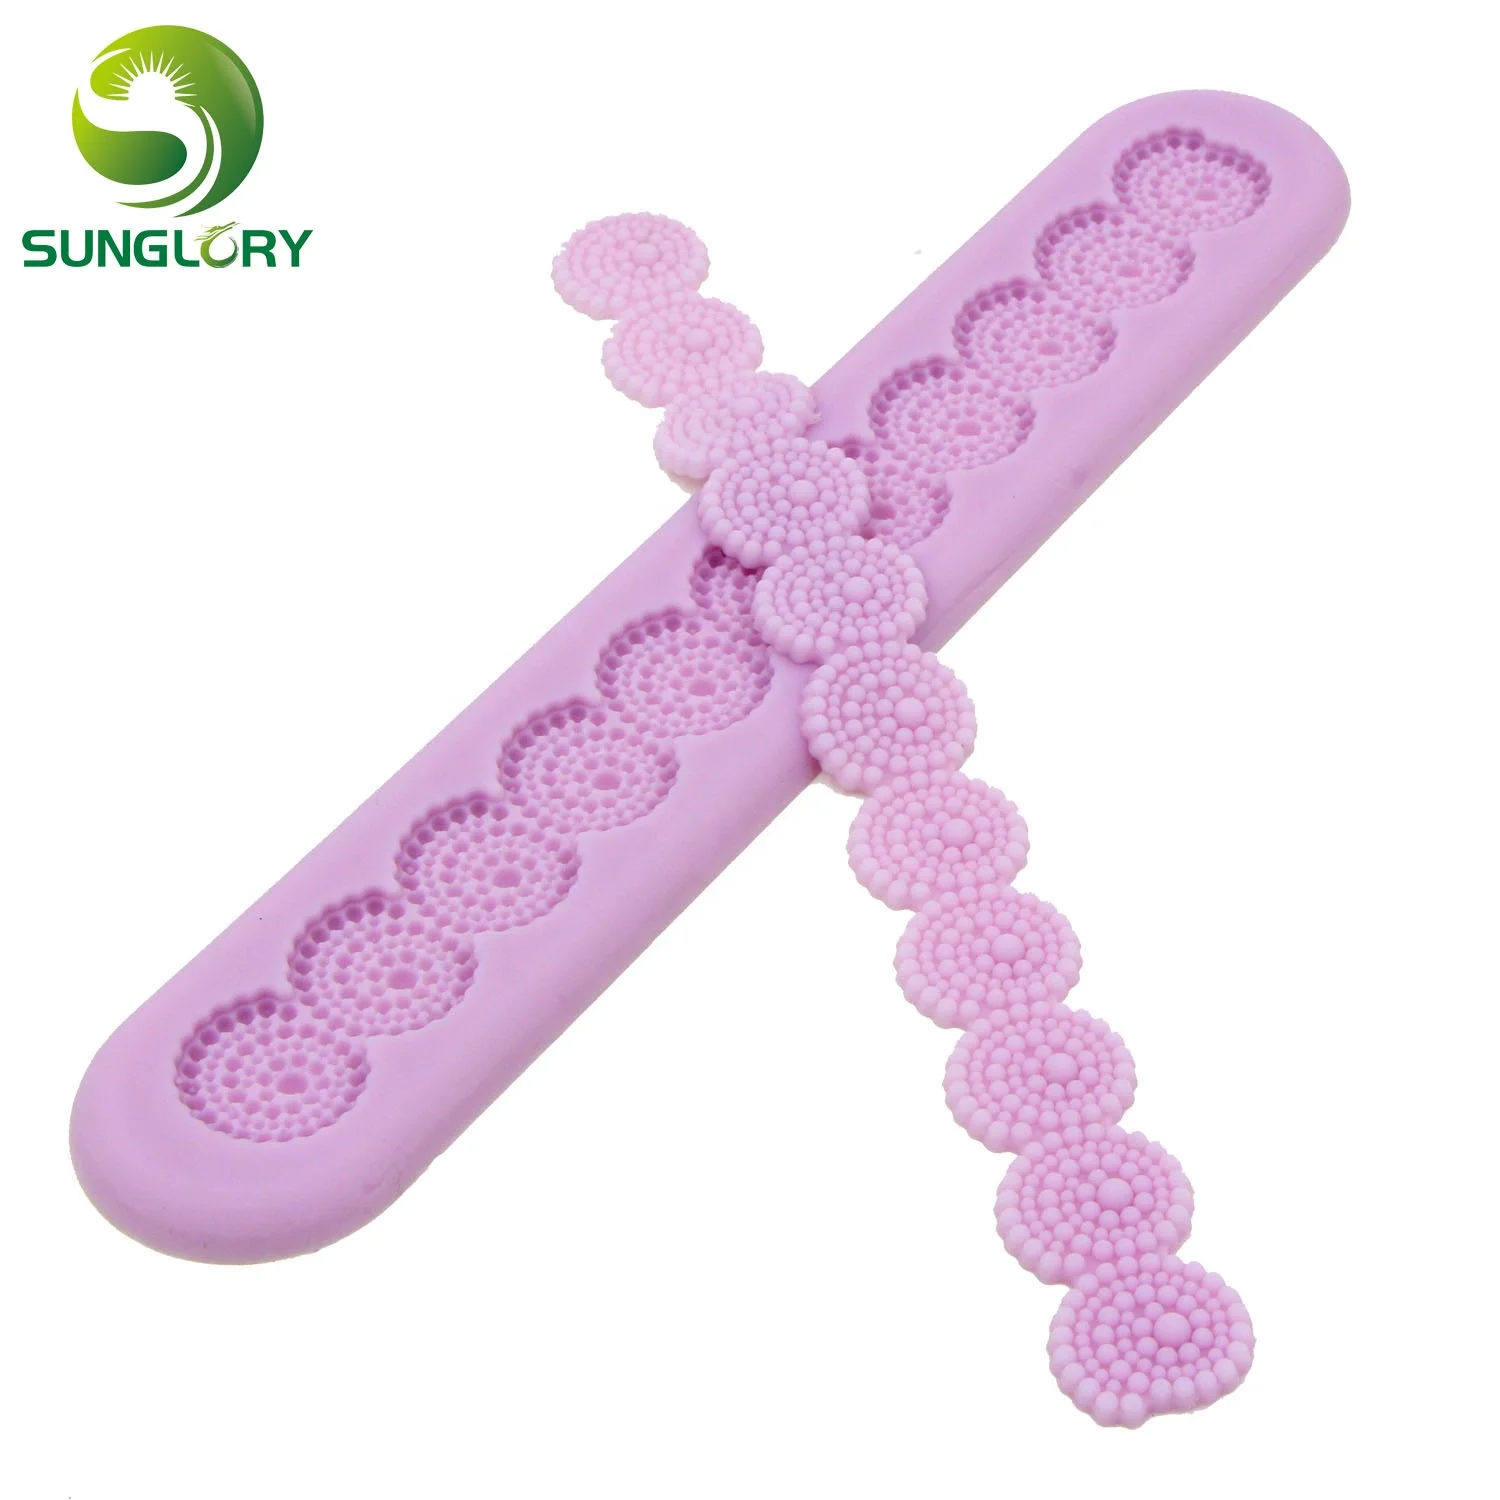 

Flowers Sugar Lace Mold DIY Fondant Silicone Lace Mat Bakeware Dining Bar Non-Stick Silicone Lace Mold Baking Tools For Cakes